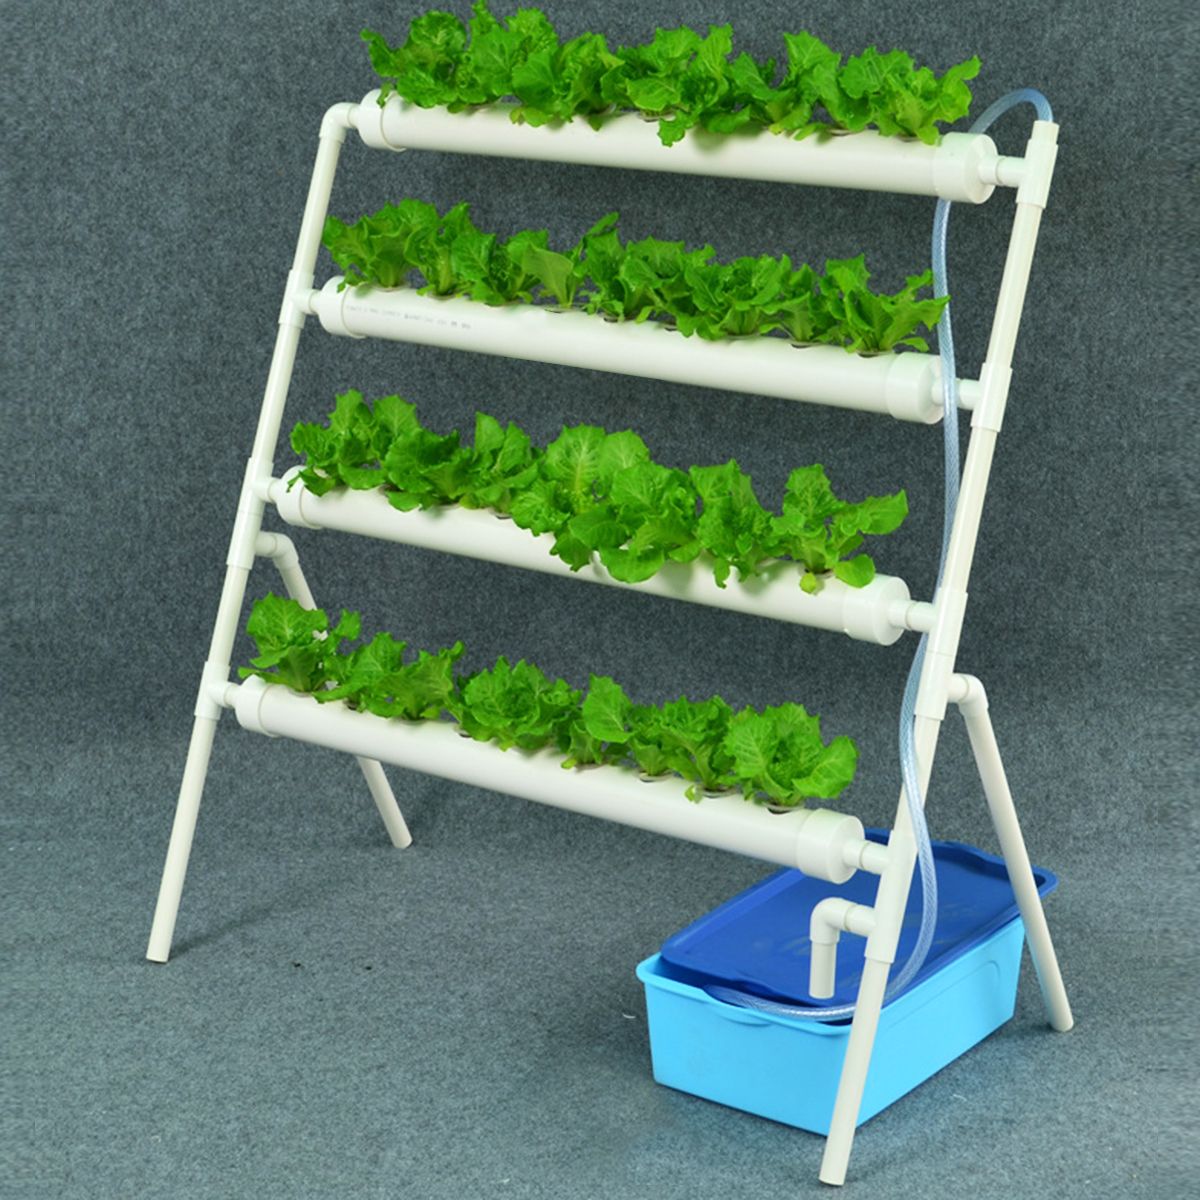 36-Site-Holes-Plant-Hydroponic-System-Water-Culture-Grow-Kit-Garden-Vegetables-Planting-Frame-1717515